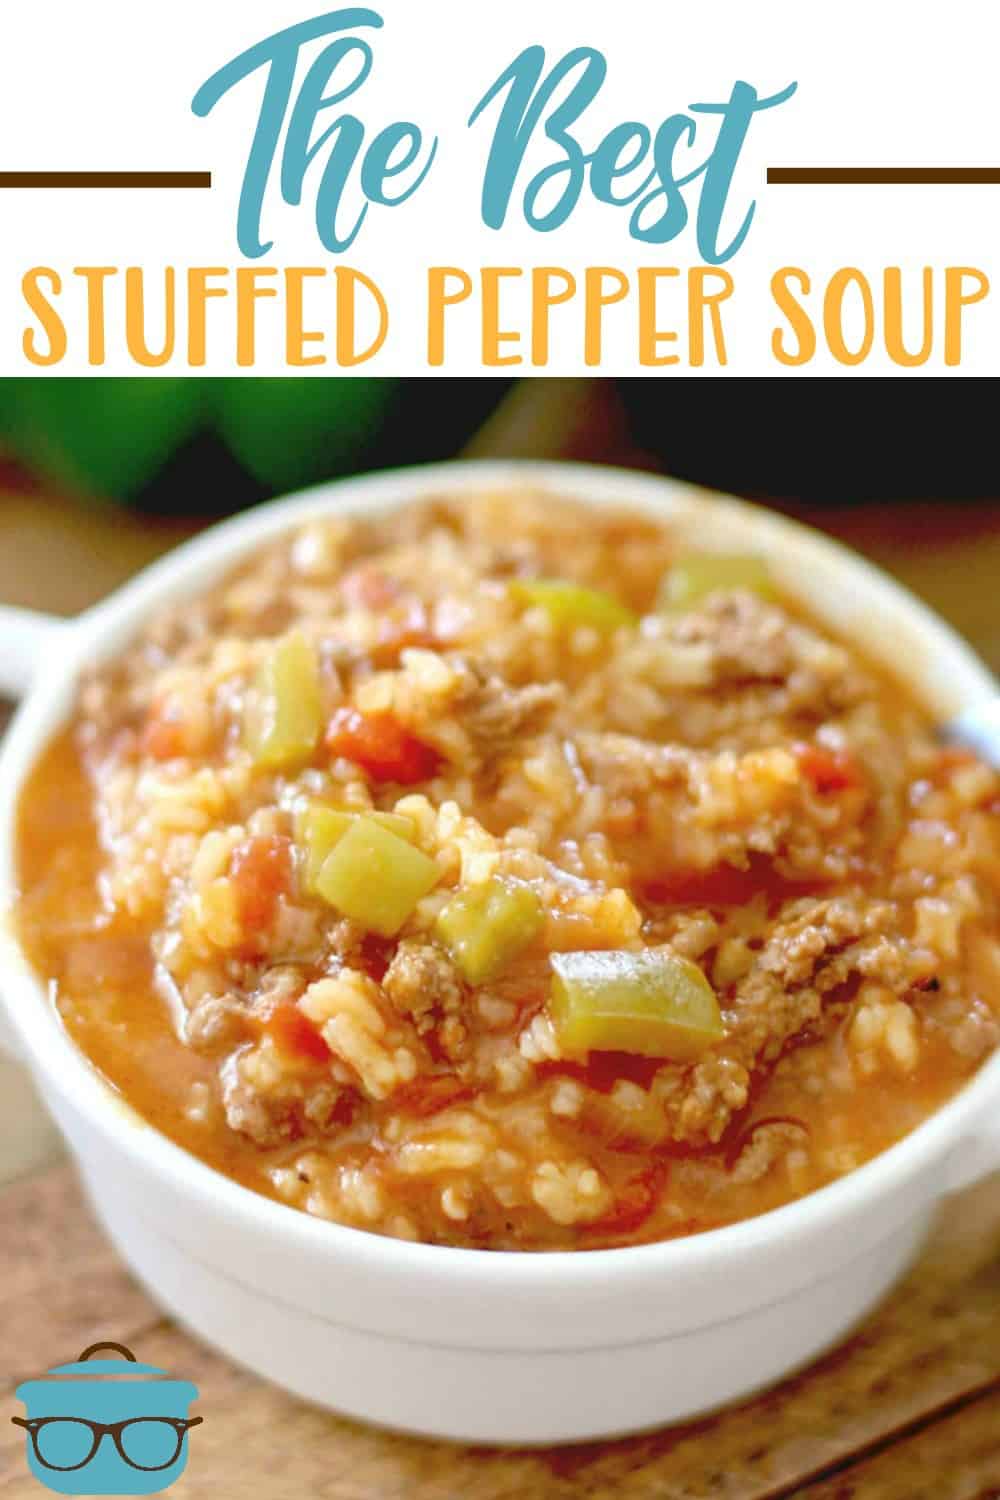 Main image of Stuffed Pepper Soup shown in a small white bowl with text on the photo that says "The Best Stuffed Pepper Soup".